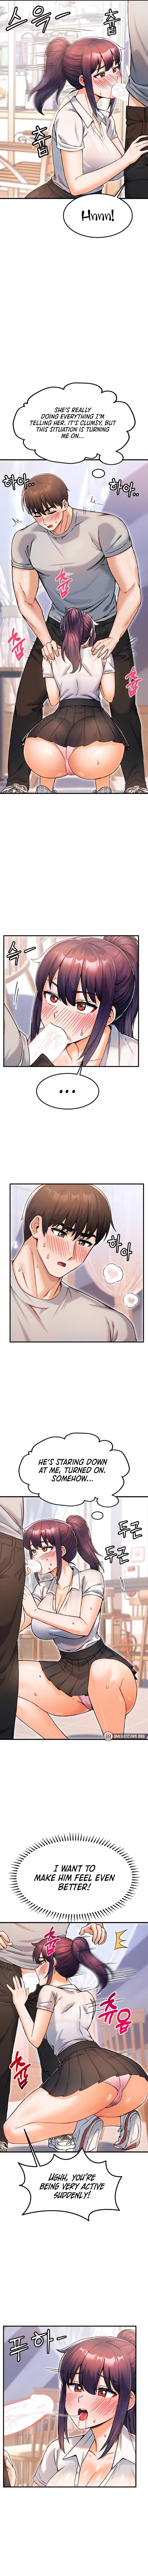 Kangcheol’s Bosses - Chapter 11 Page 7